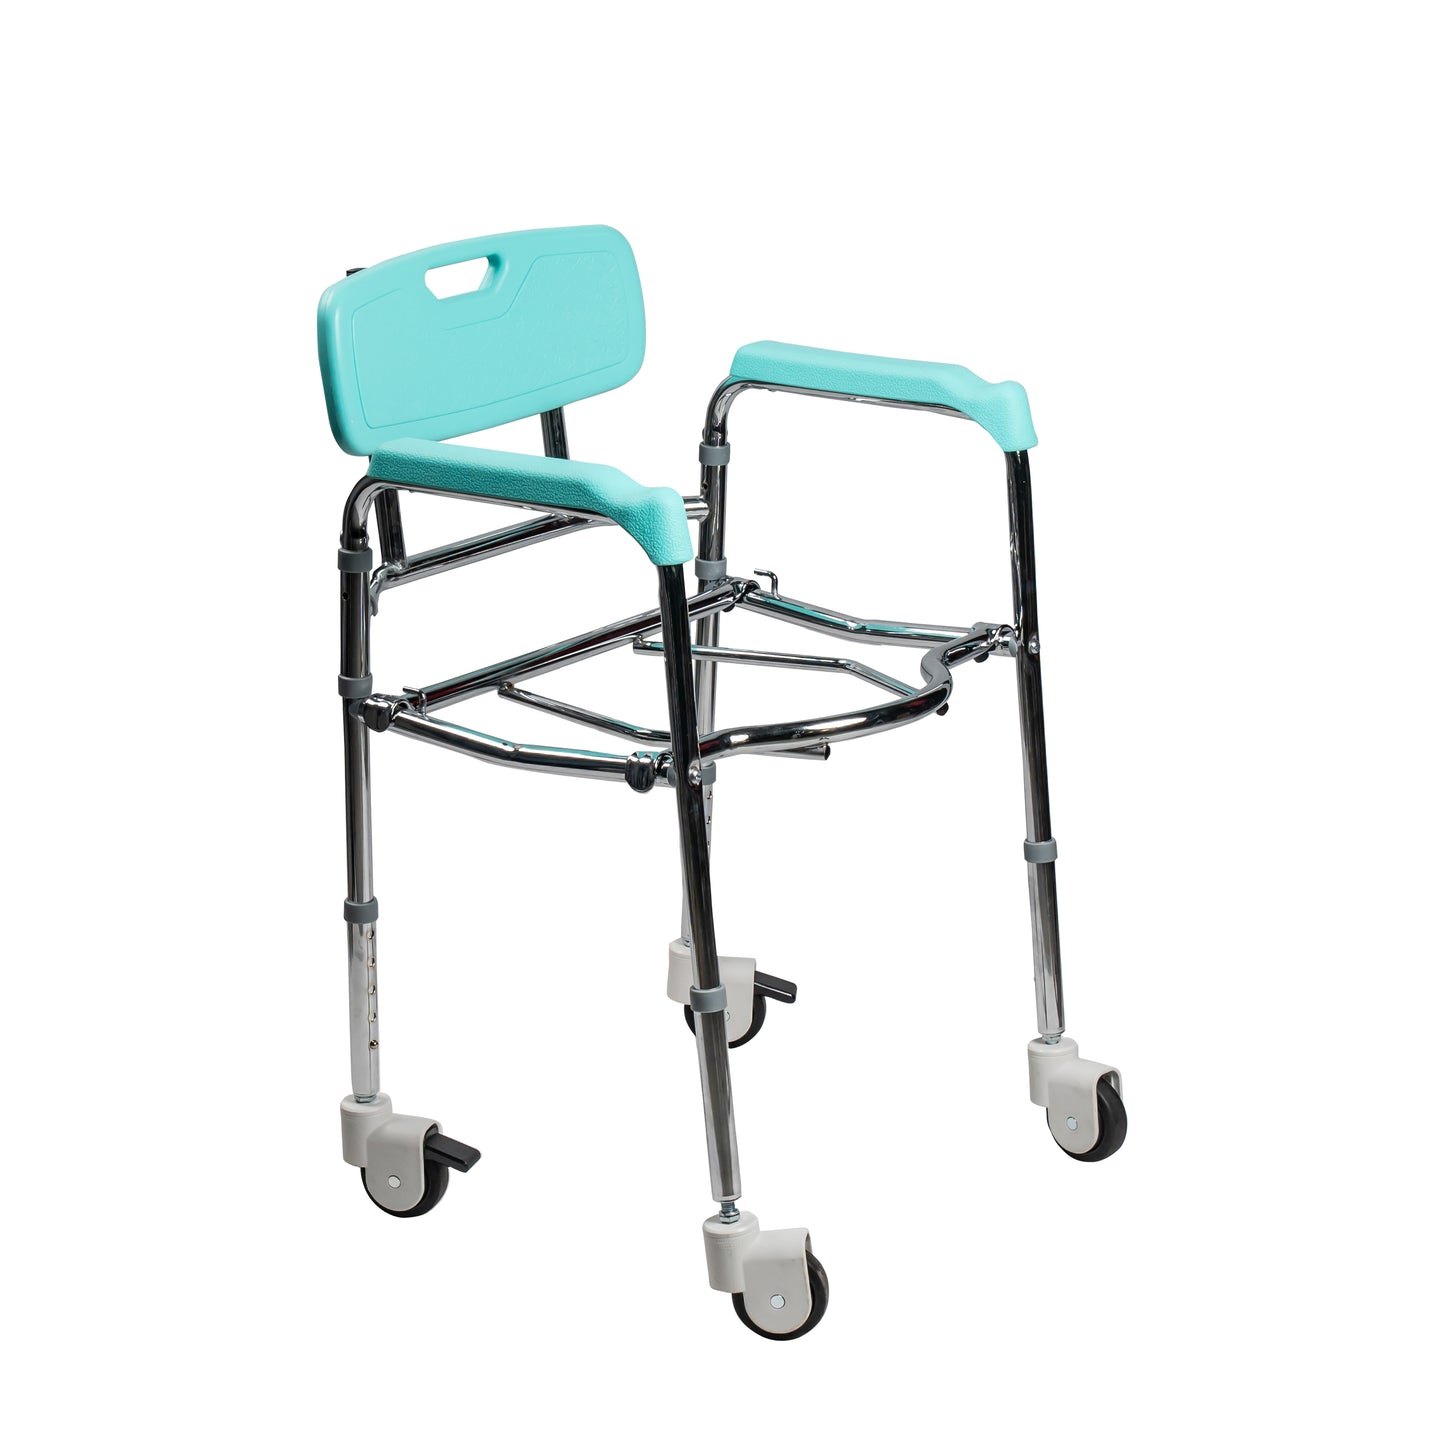 ARREX VP120 PREMIUM COMMODE WHEELCHAIR: HEIGHT ADJUSTABLE, REAR SOLID-CASTOR WITH BRAKES, ATTACHED POT, ENHANCED MOBILITY, SAFETY